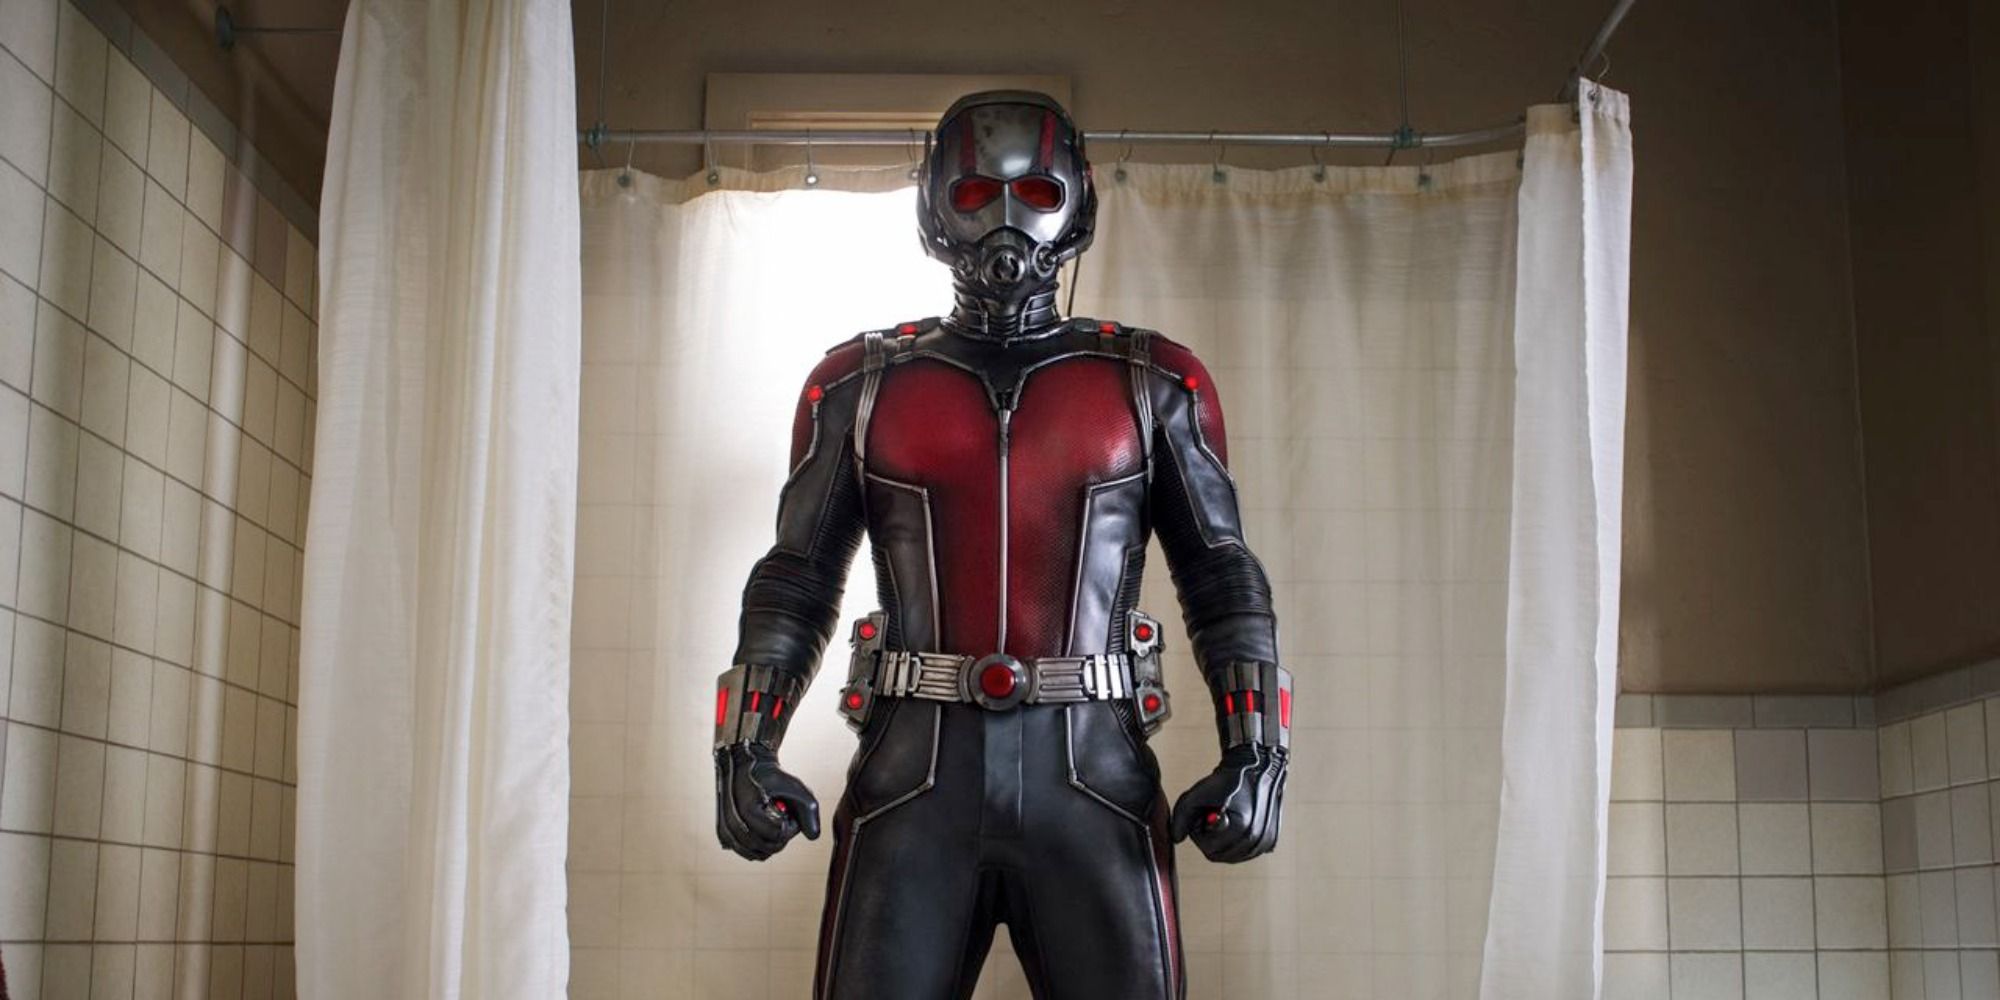 Ant-Man in his suit standing in the shower 